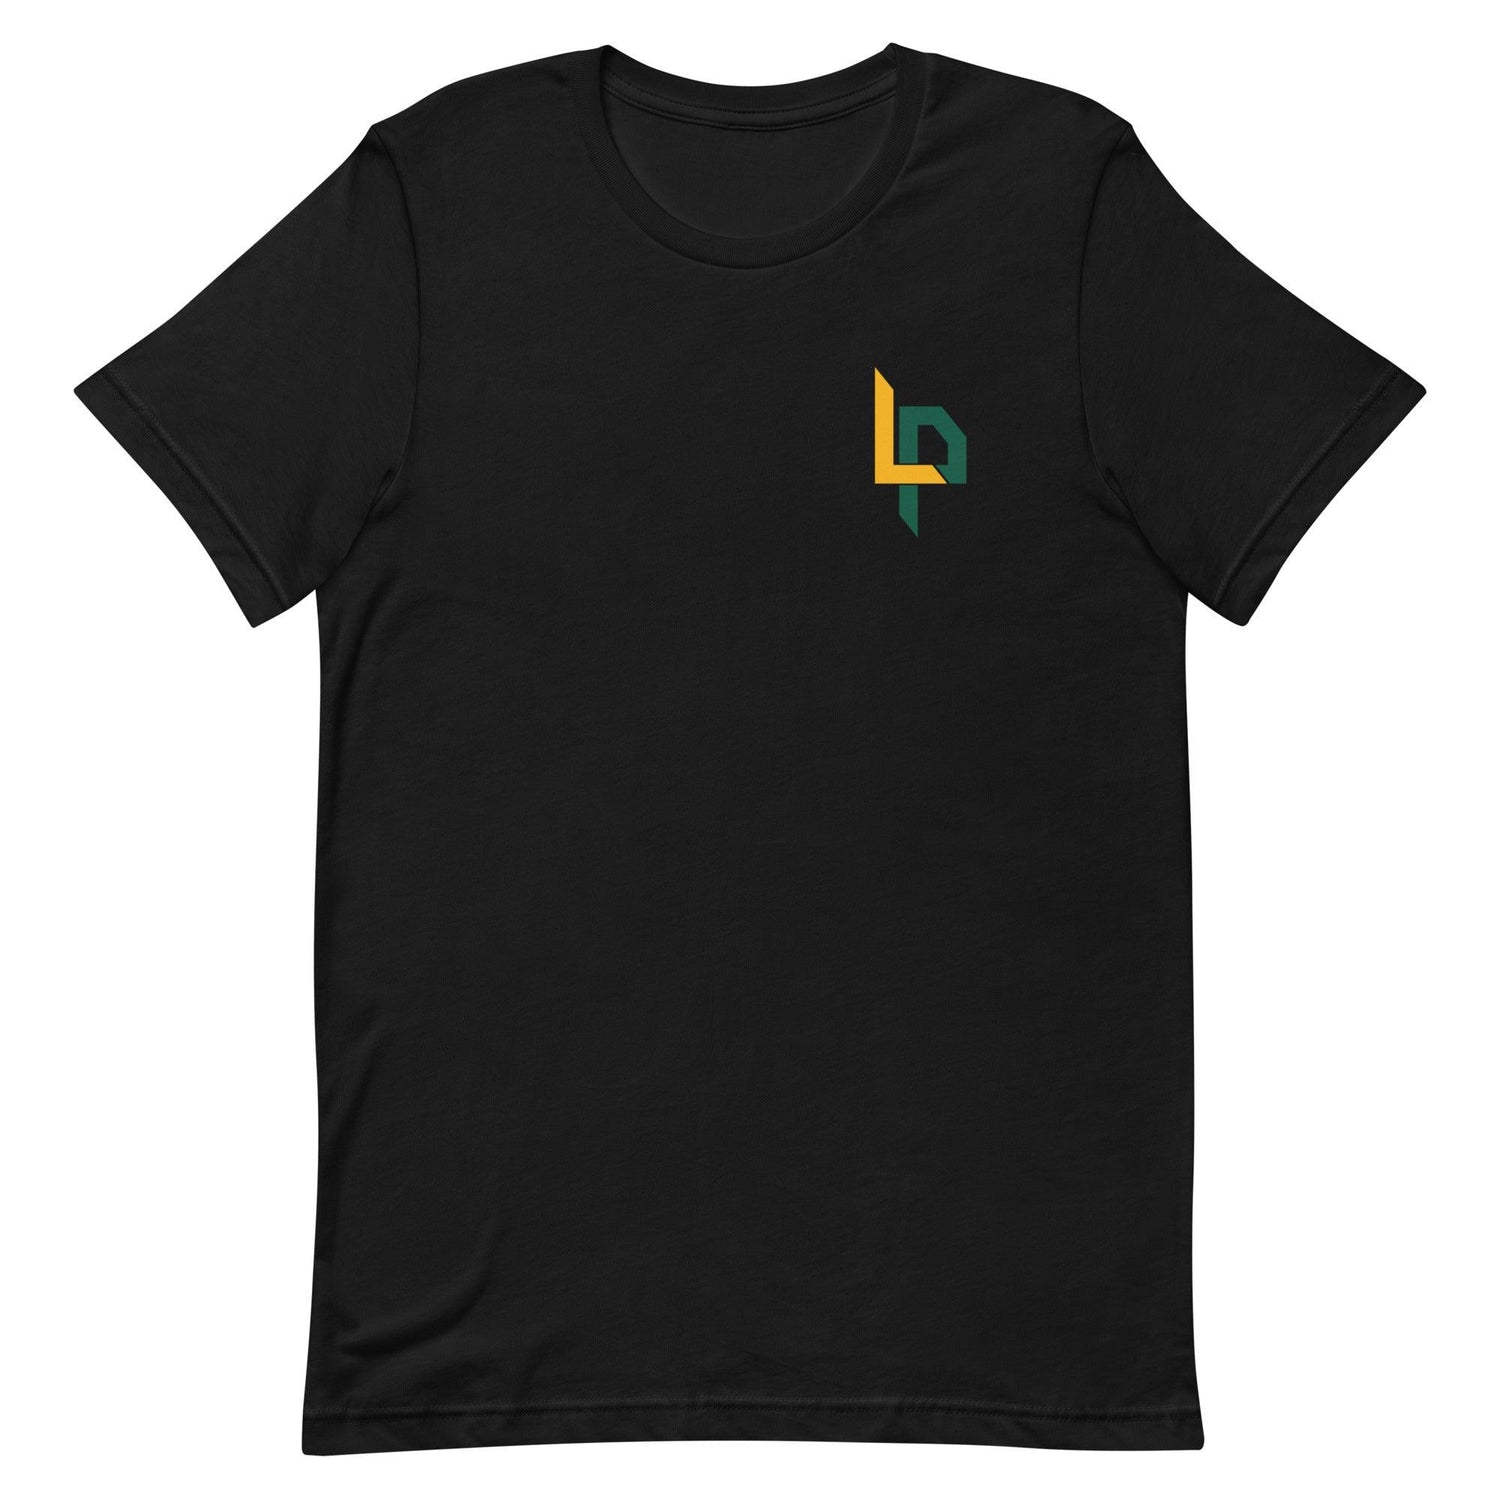 Lachlan Pitts "Essential" t-shirt - Fan Arch